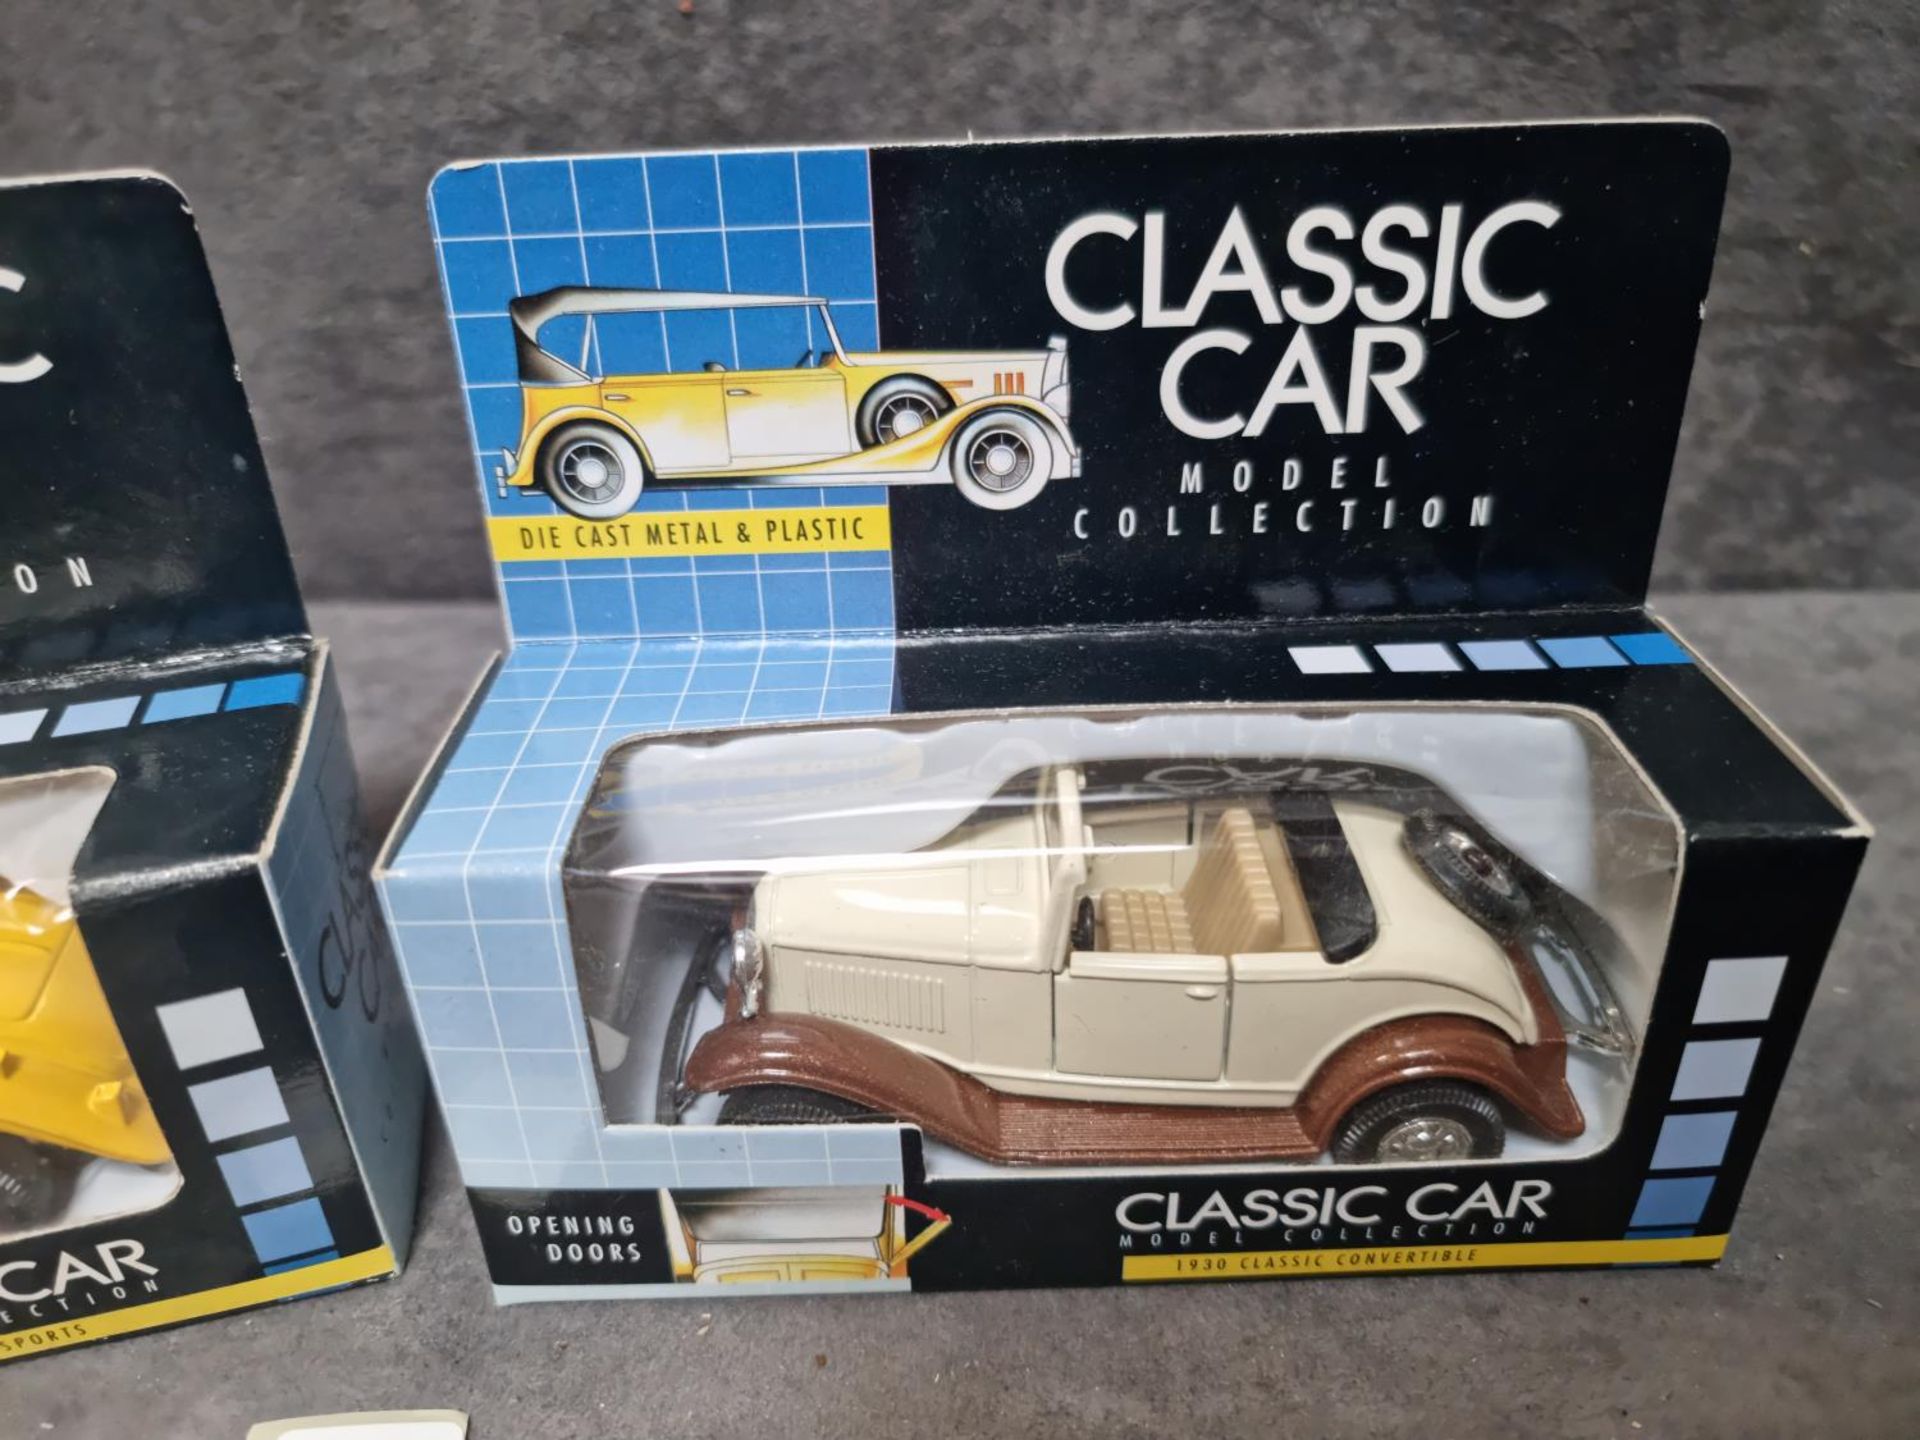 2 x Classic Car Model Collection Diecast Models #8871h 1936 Classic Sports And #8875C 1930 Classic - Image 3 of 3